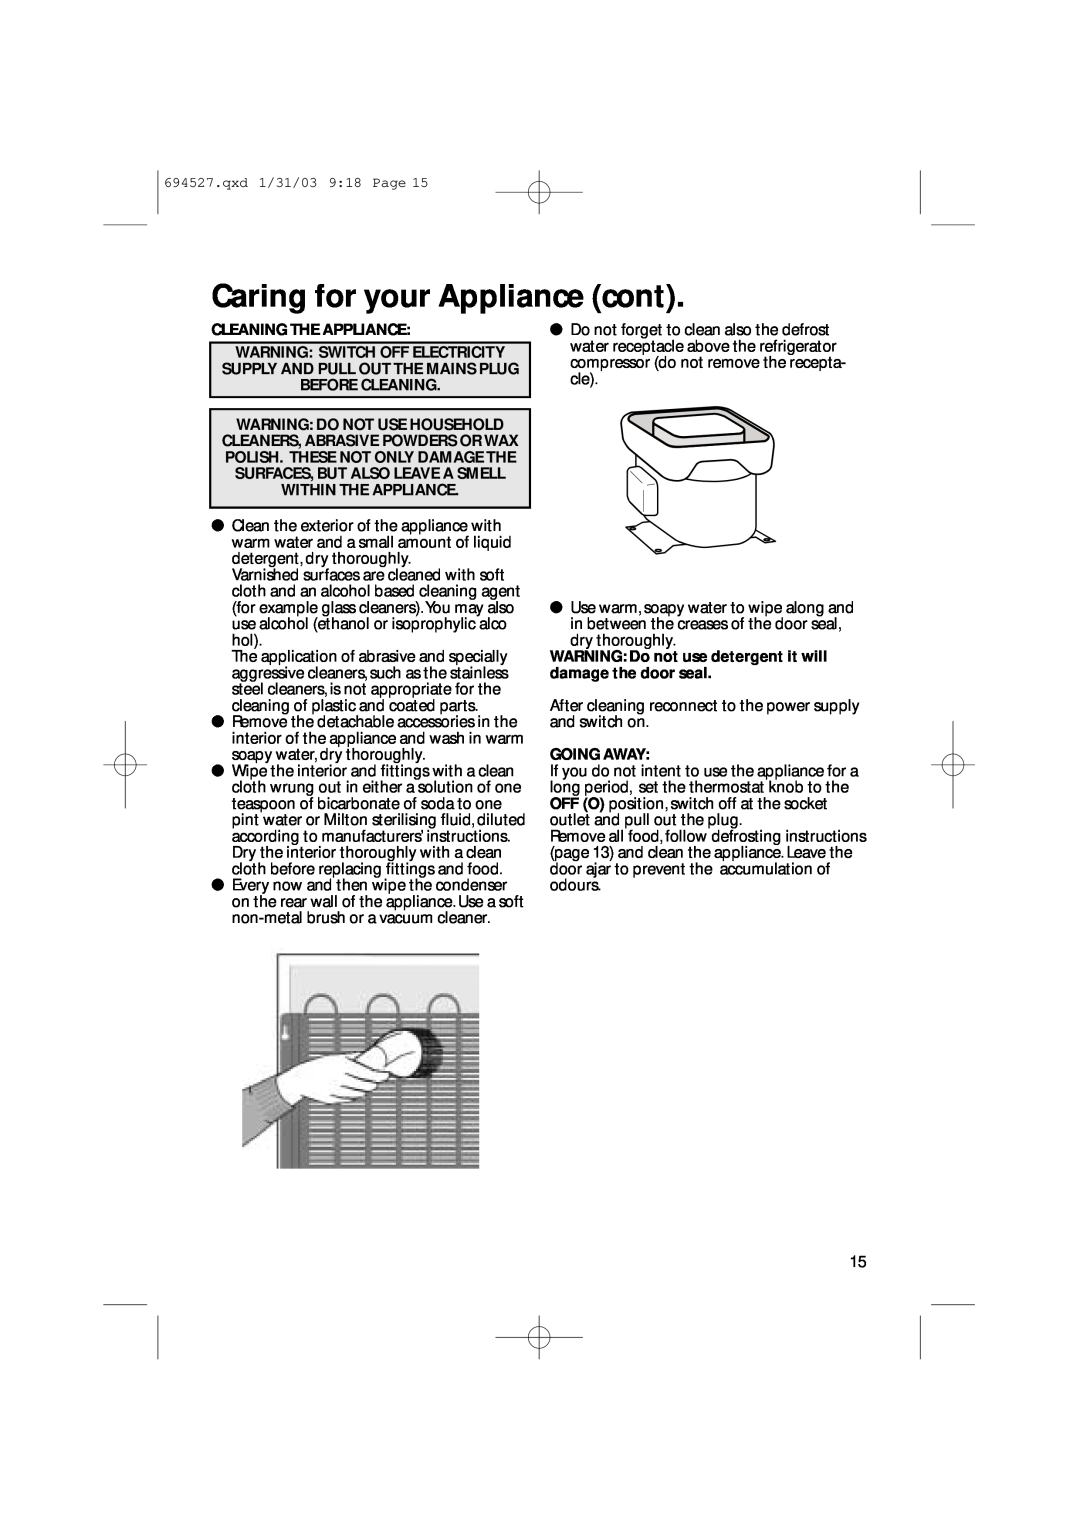 Creda CM 311 I manual Caring for your Appliance cont, Cleaning The Appliance, Going Away 